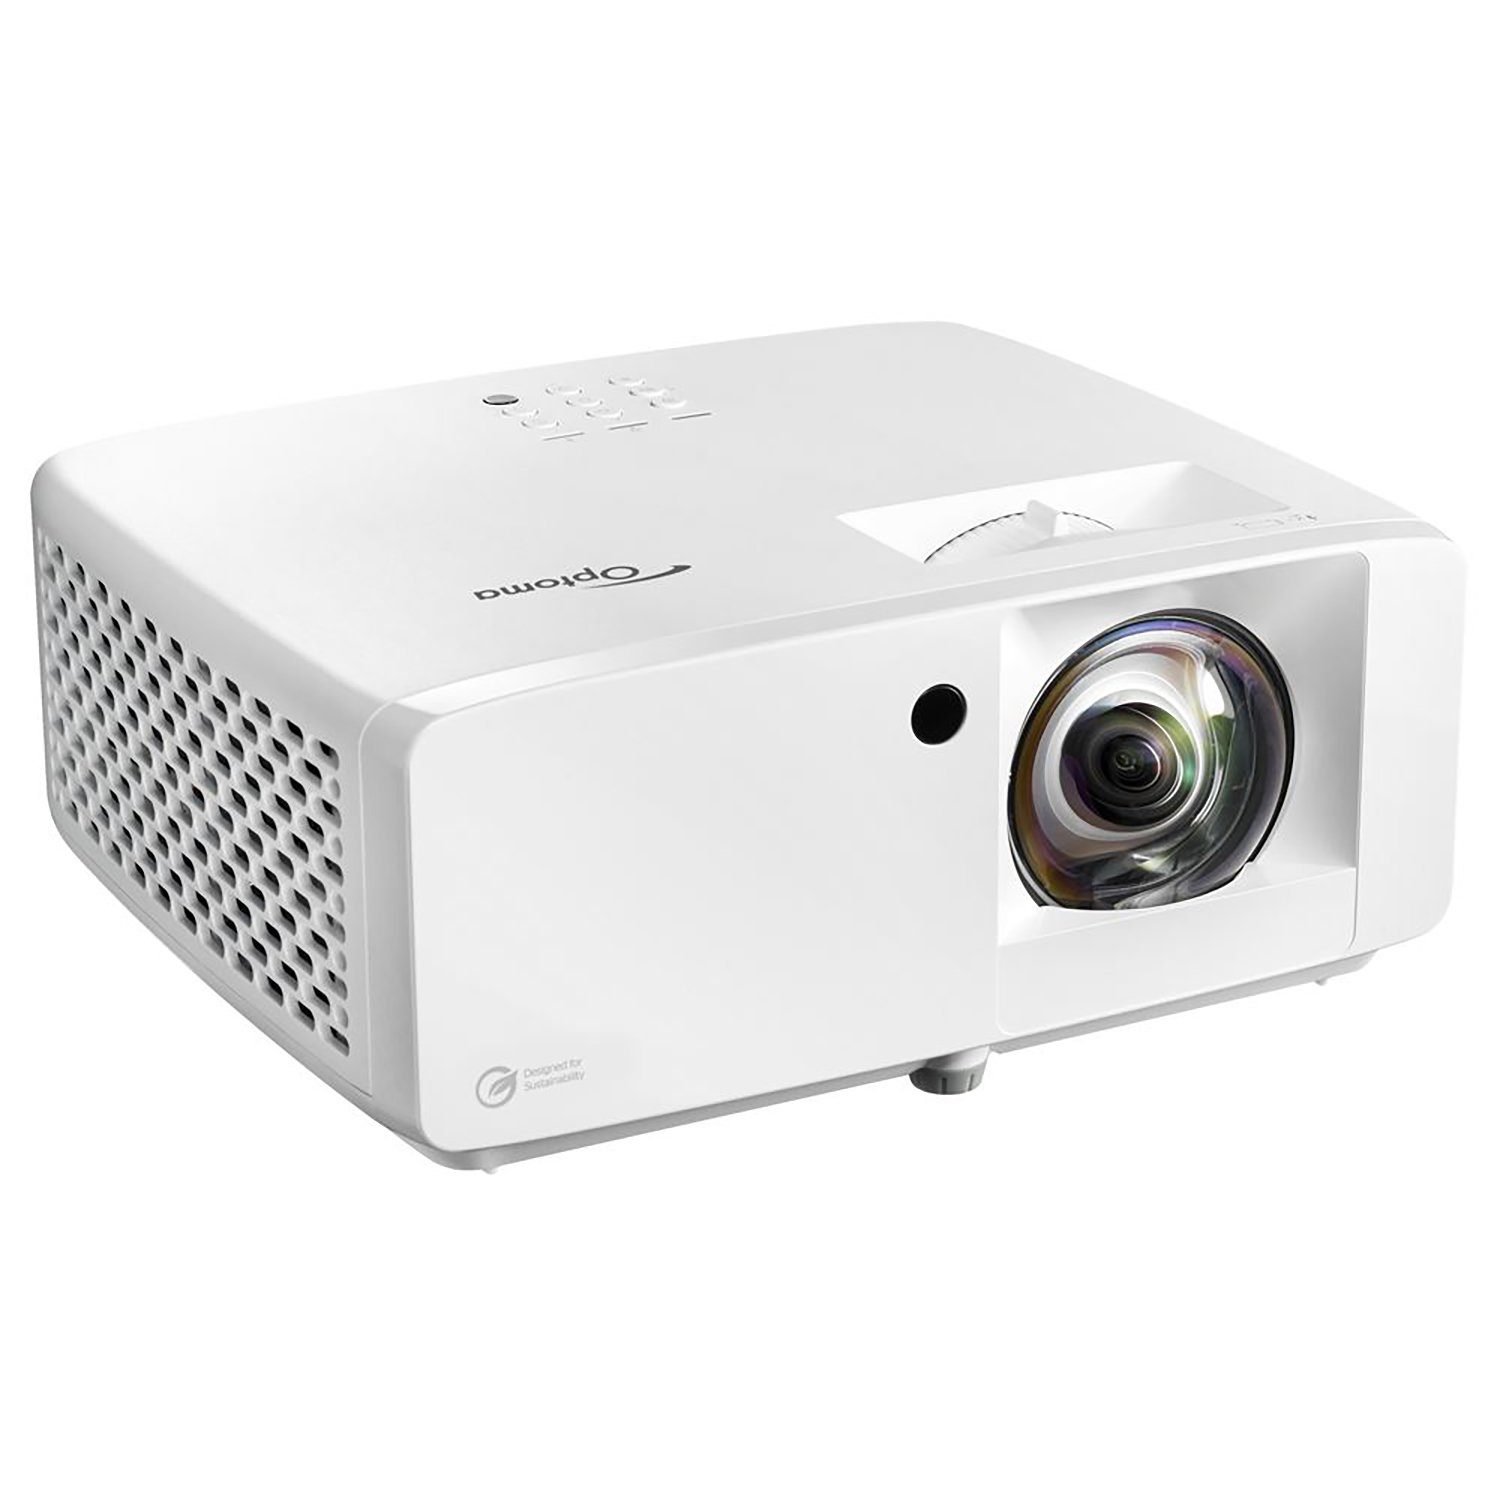 1080 (4200 Optoma 2000000:1, x 1920 lm, px) GT2100HDR 3D-Beamer